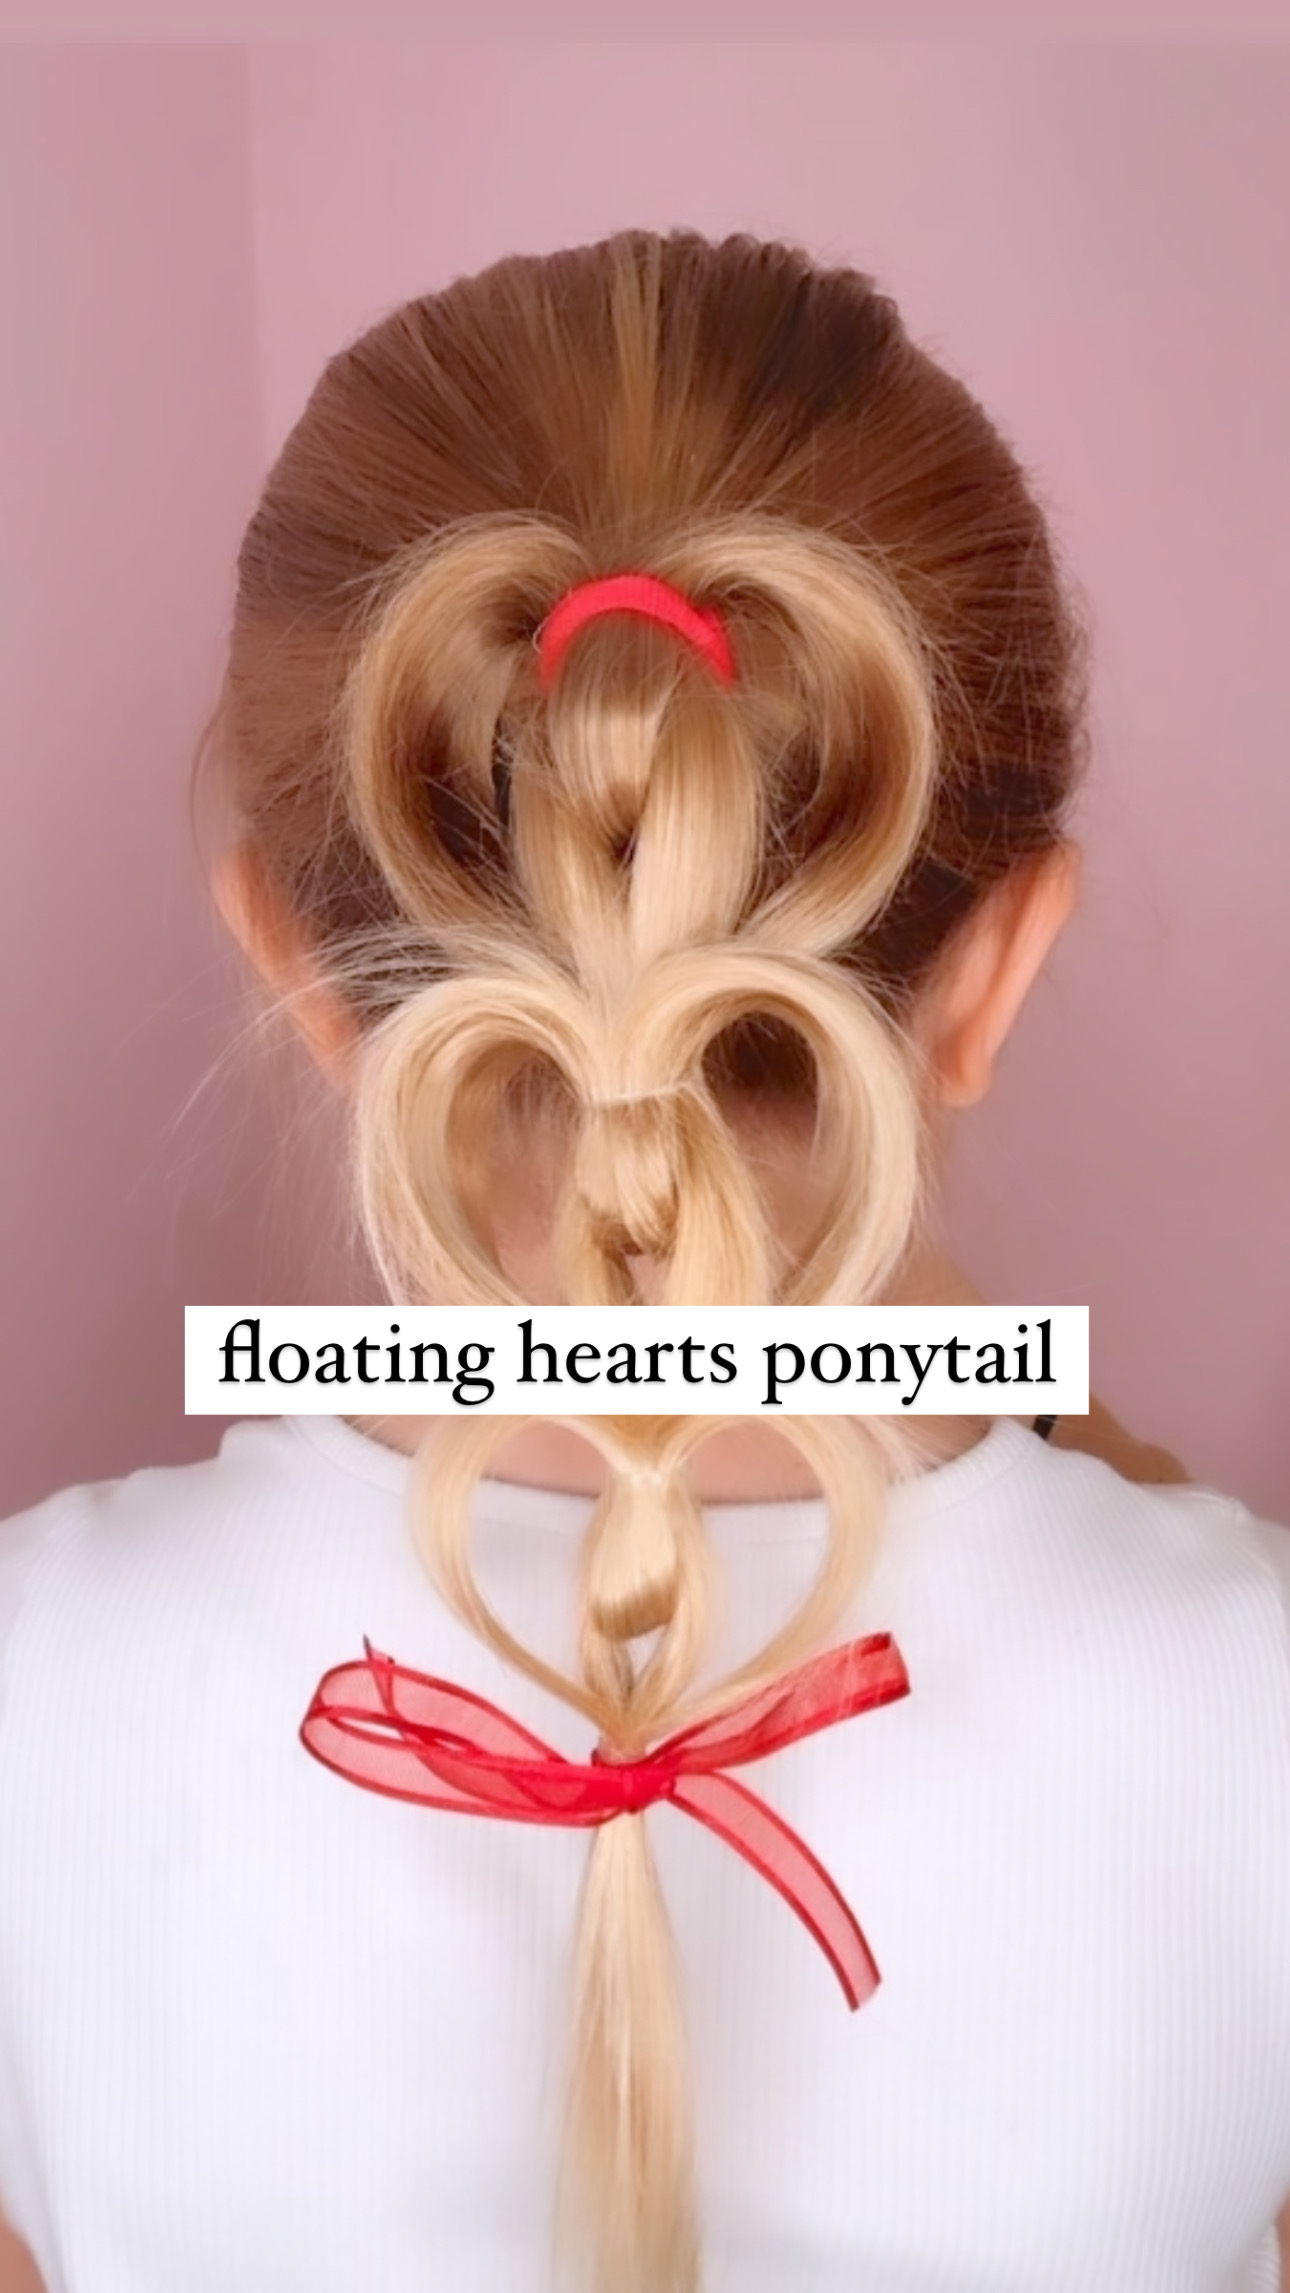 Stylish & Practical: 8 Braided Ponytail Hairstyles for All Hair Lengths